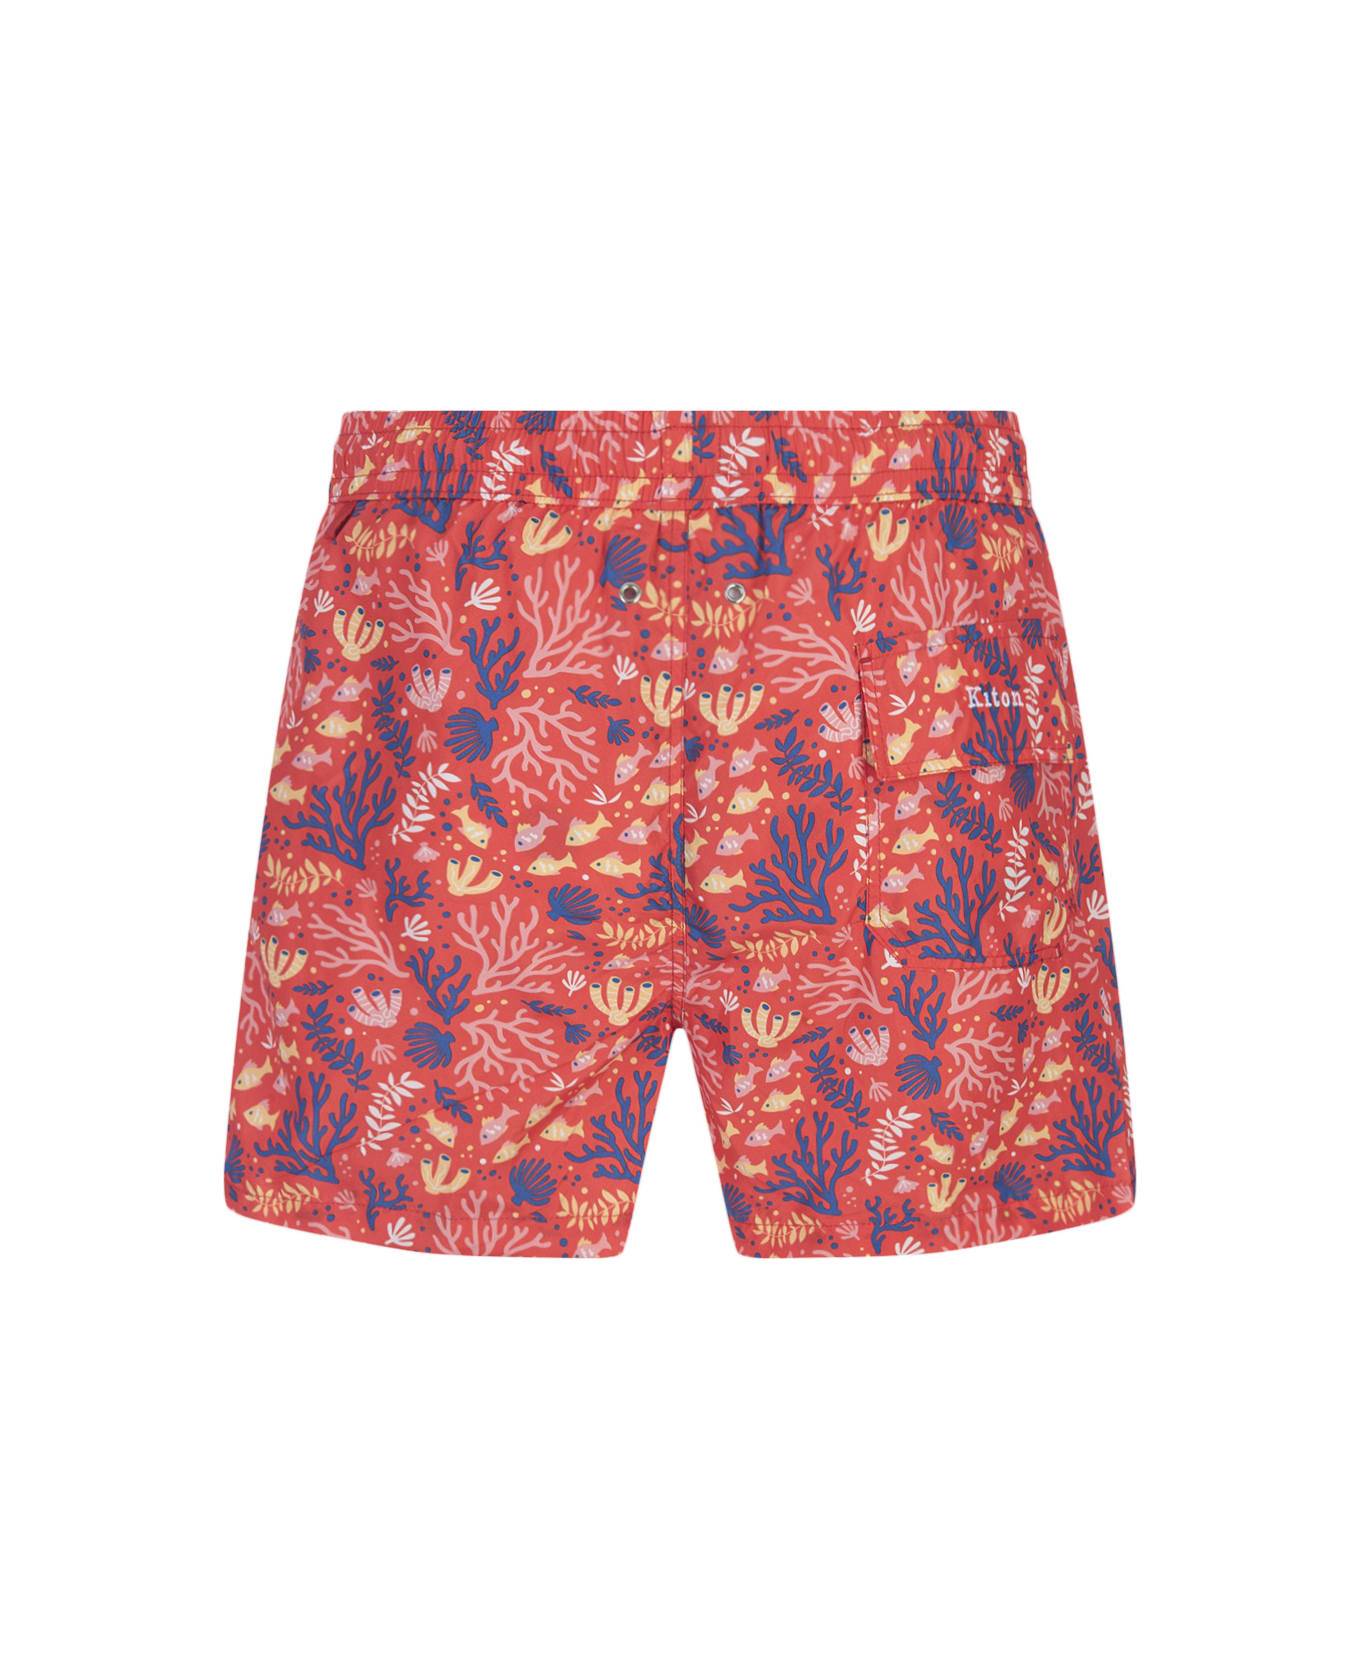 Kiton Red Swim Shorts With Fish And Coral Pattern - Red スイムトランクス